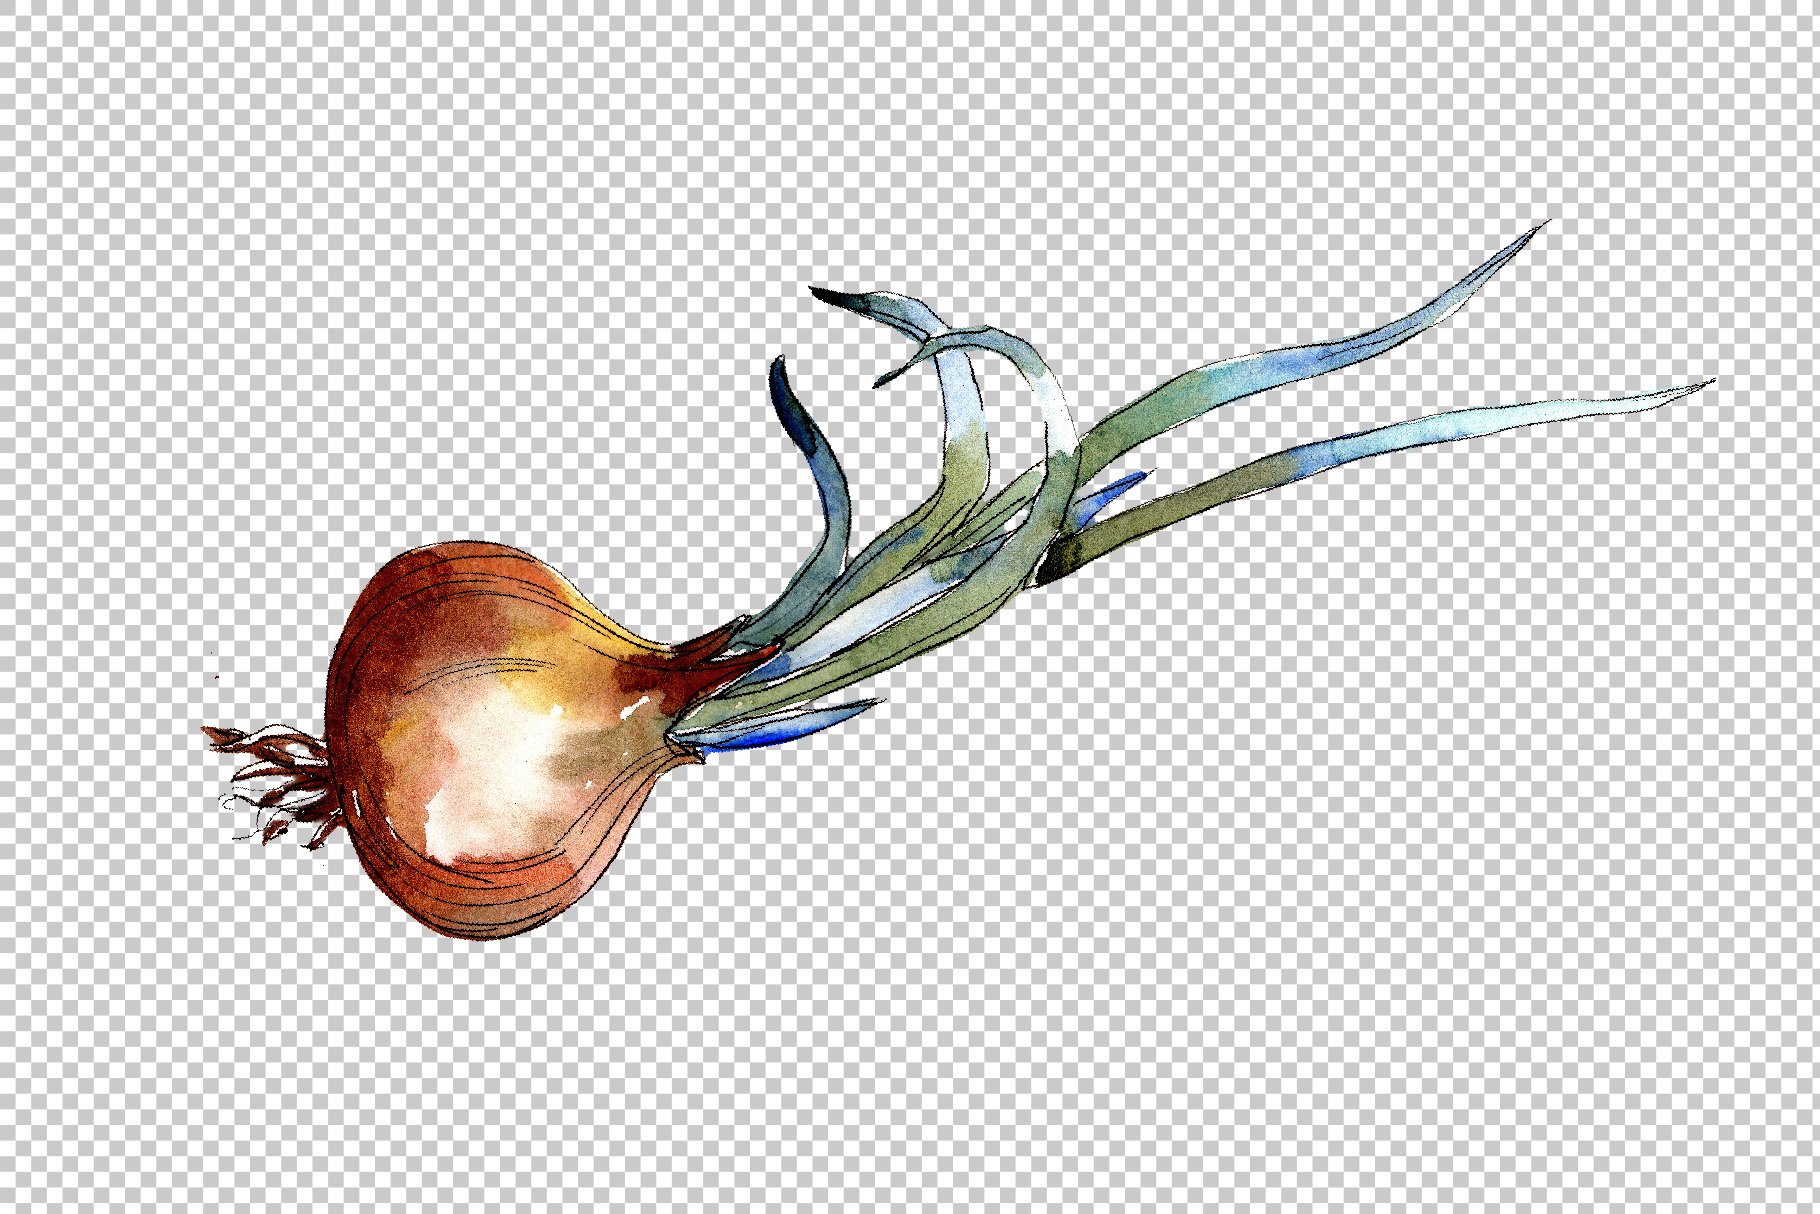 Transparent background with the young onion.